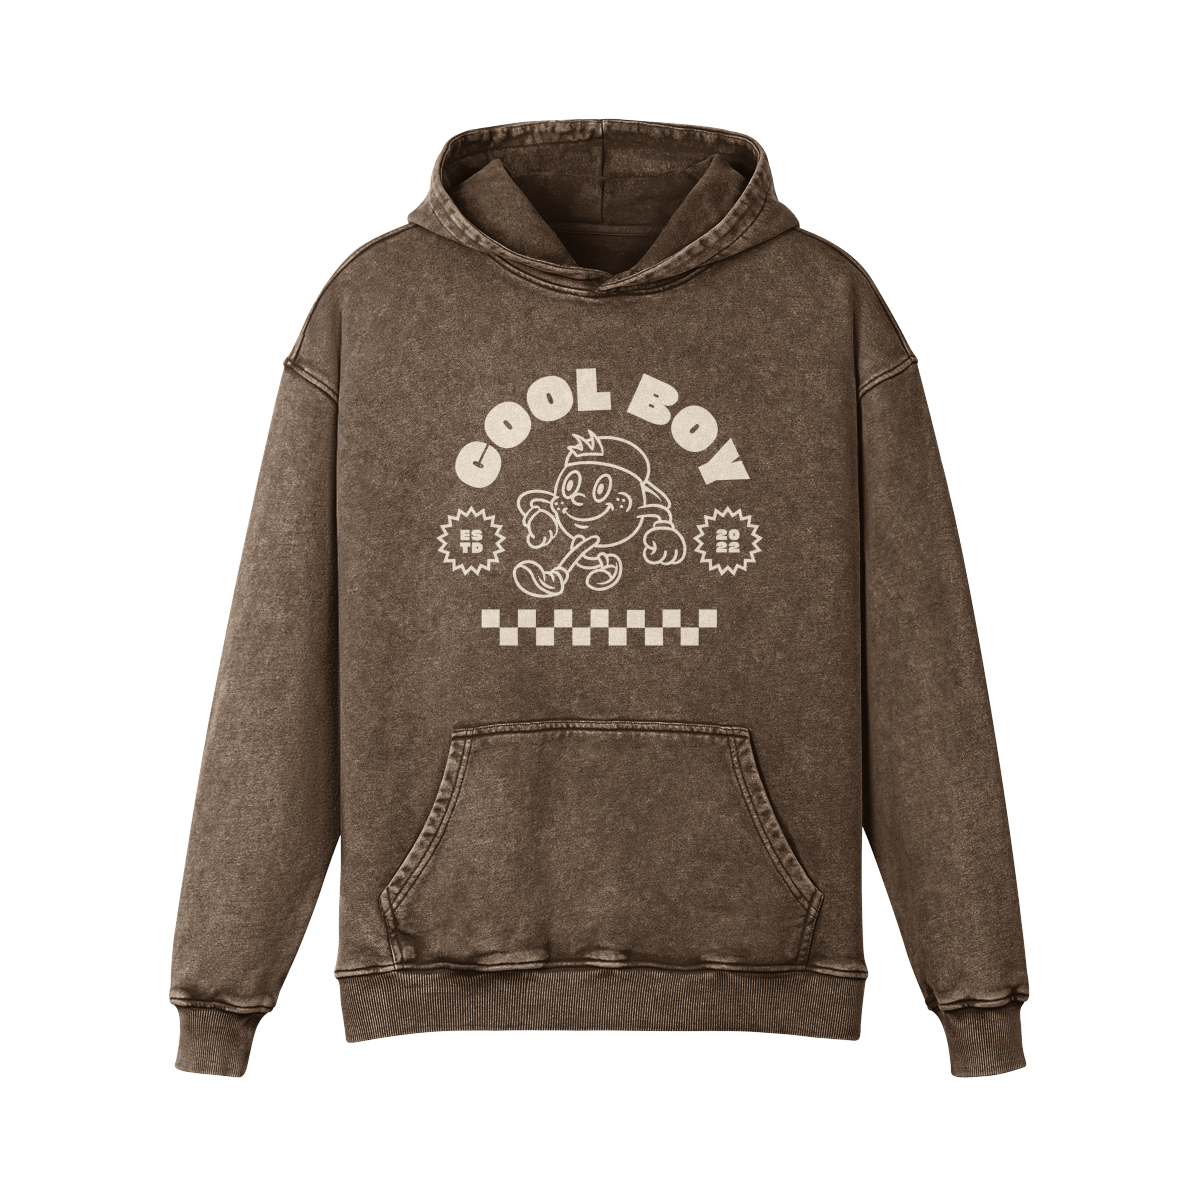 Oversized Hoodie with Cool Boy logo